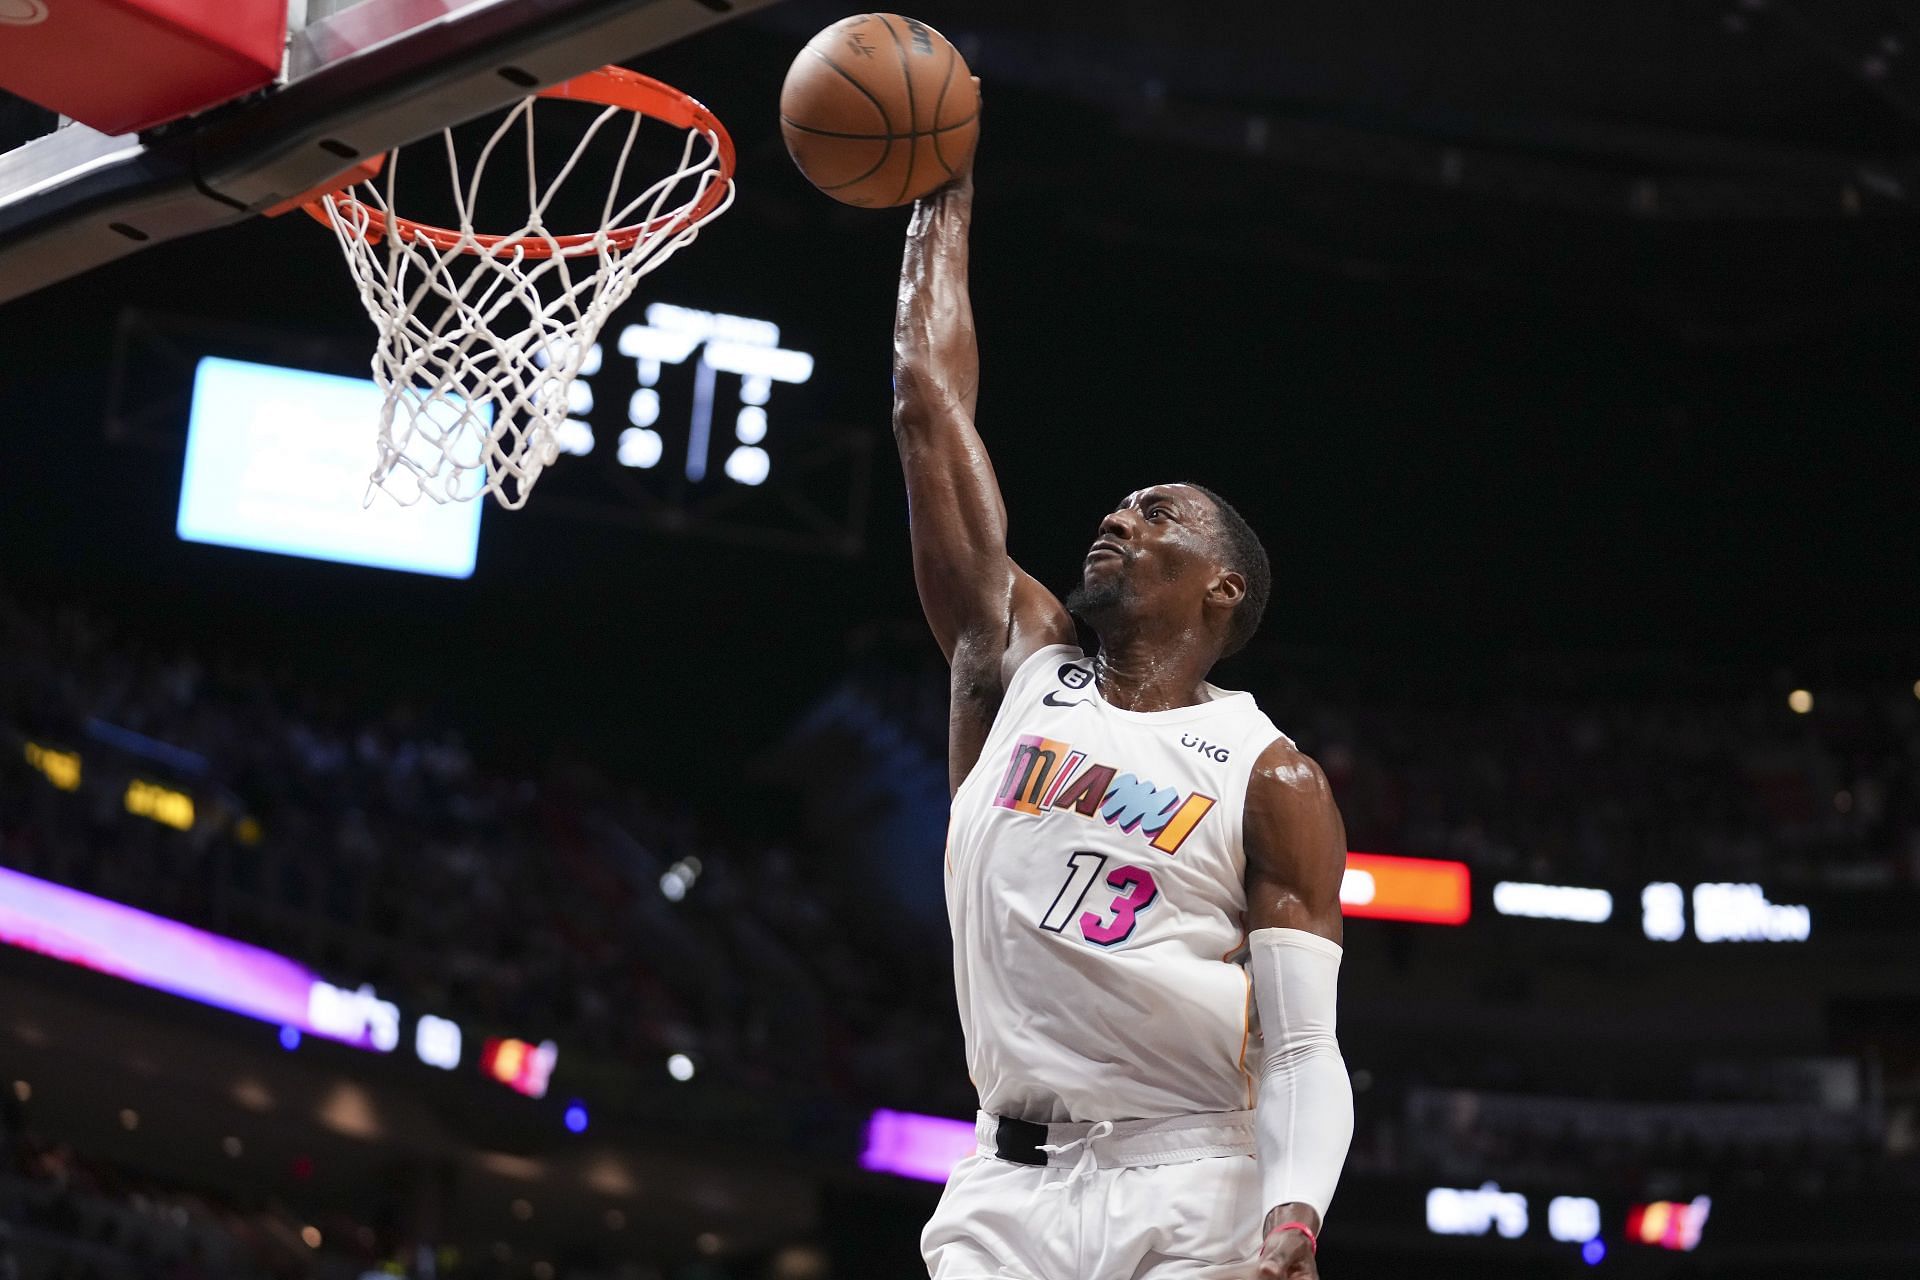 Bam Adebayo could miss another game due to a right shoulder sprain.